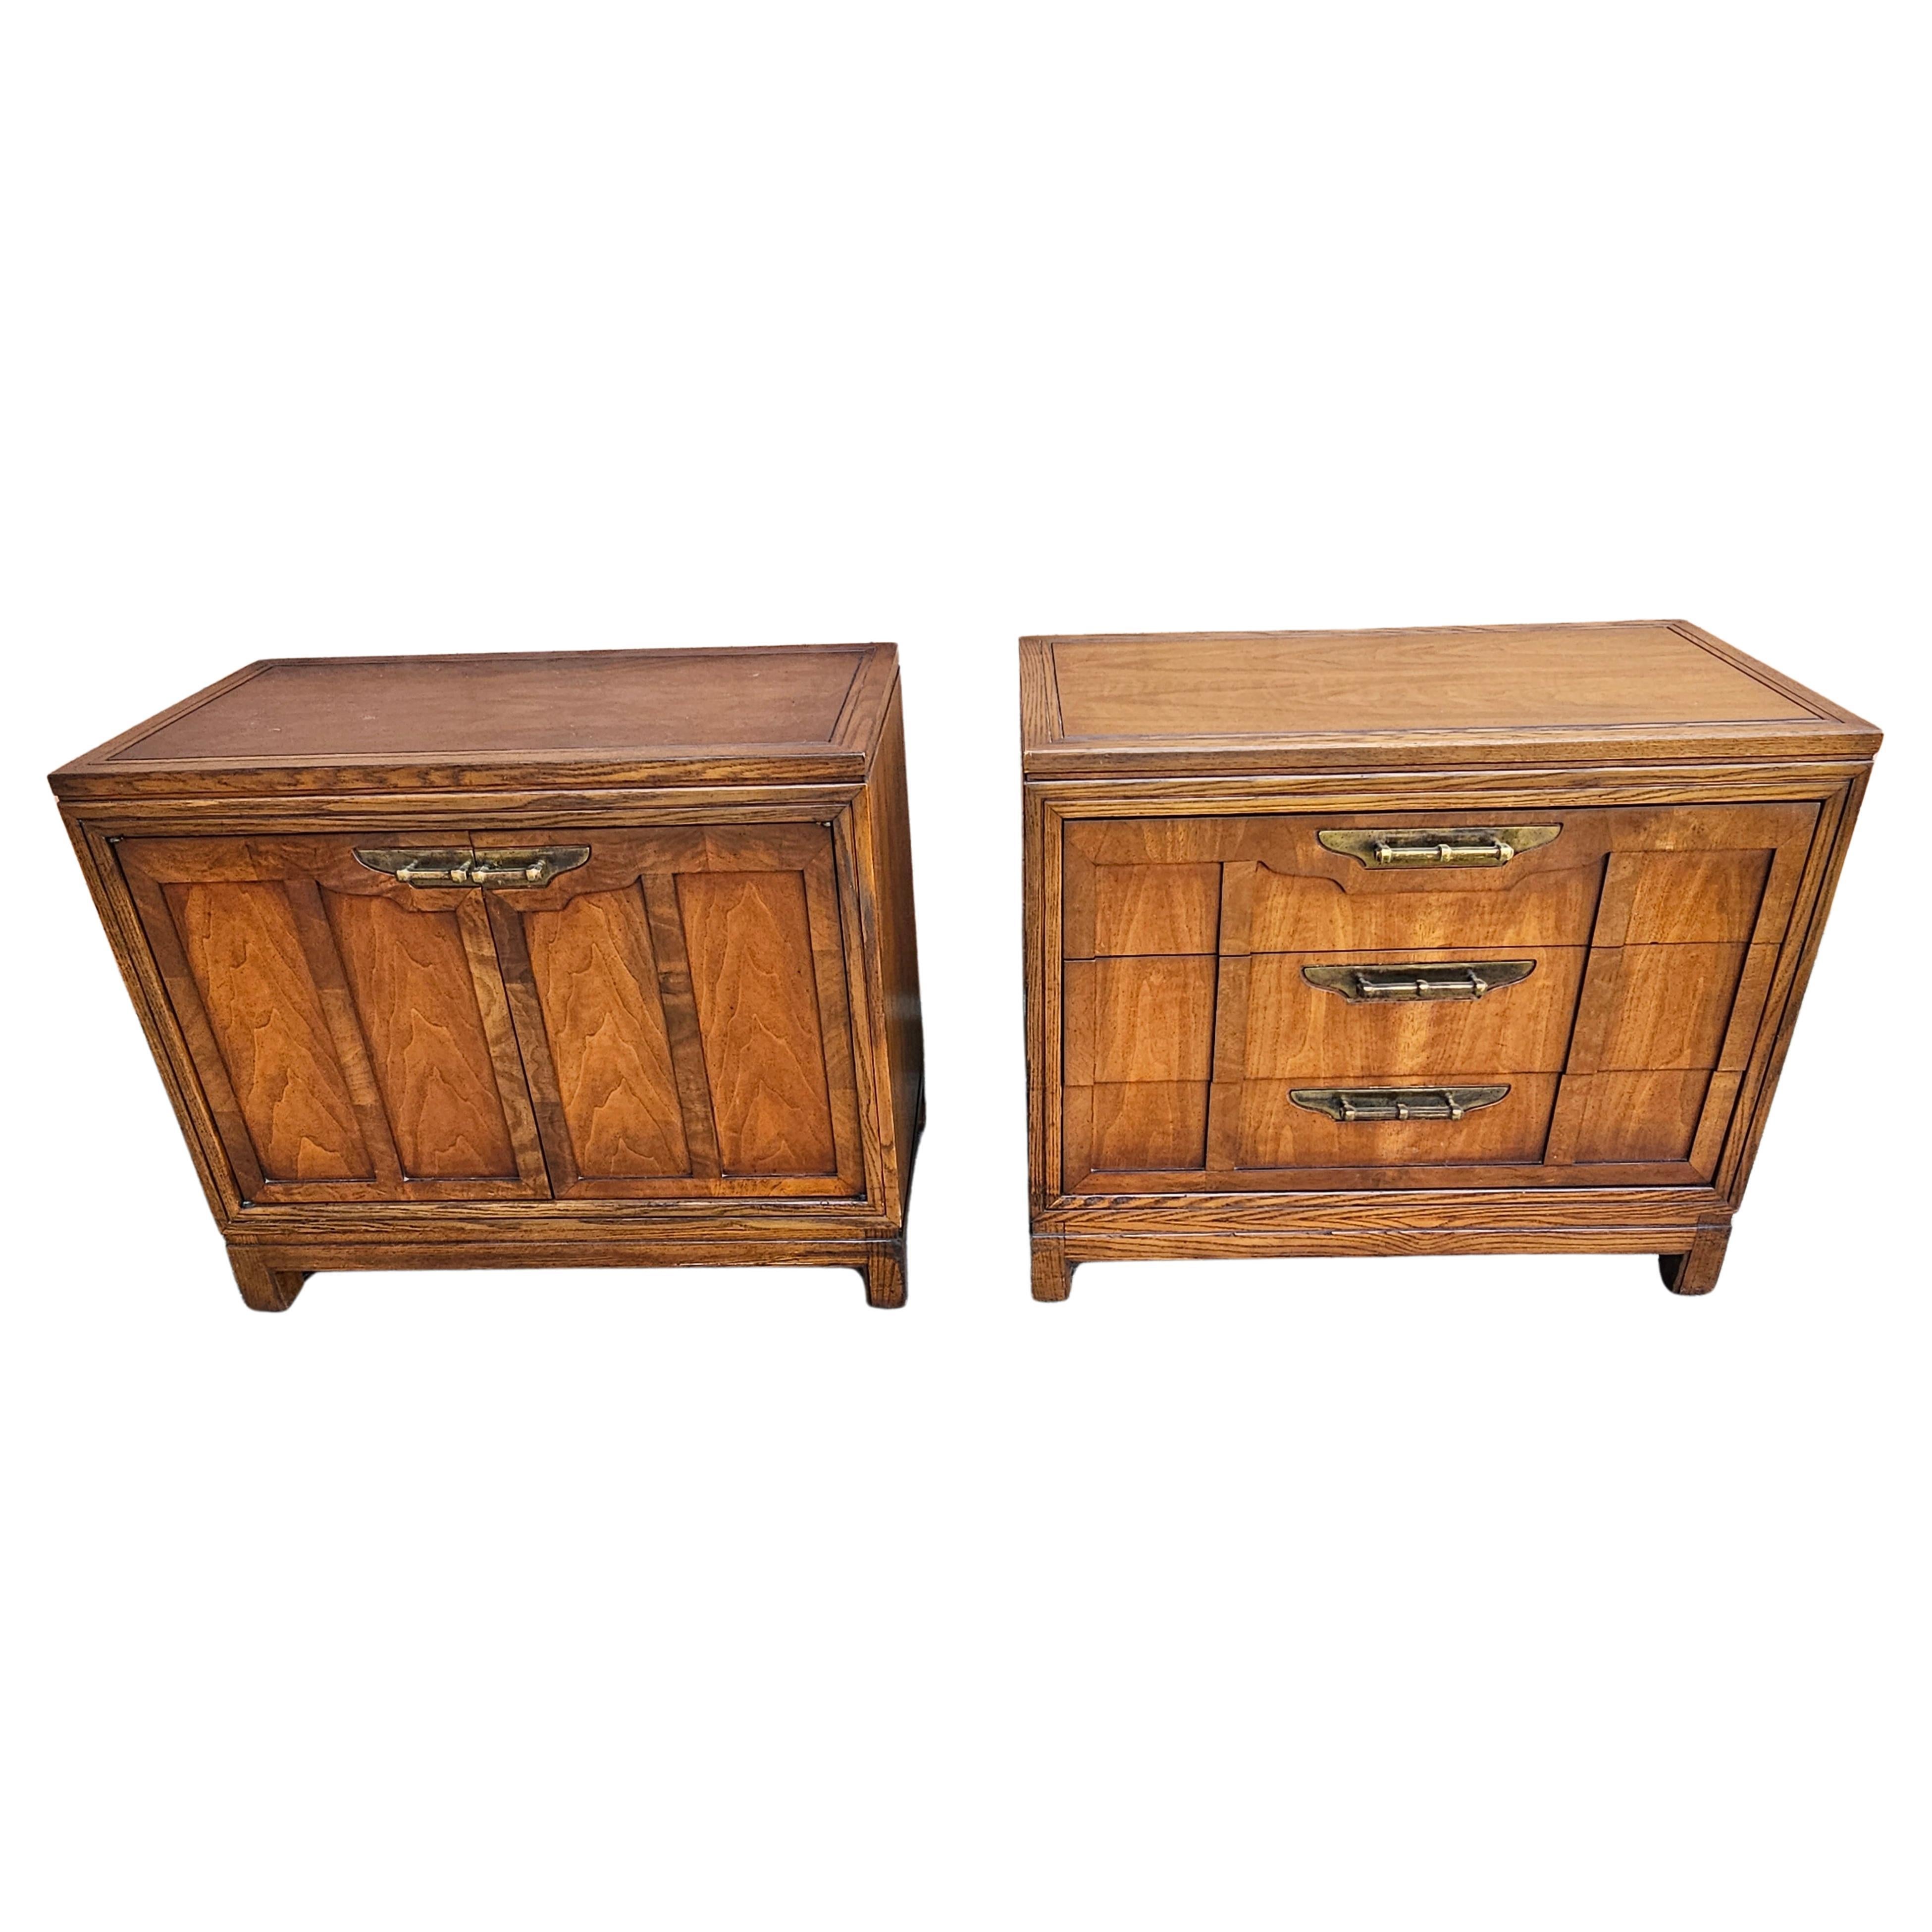 Pair of Fancher Furniture Walnut and Oak Chest of Drawers and Side Cabinet